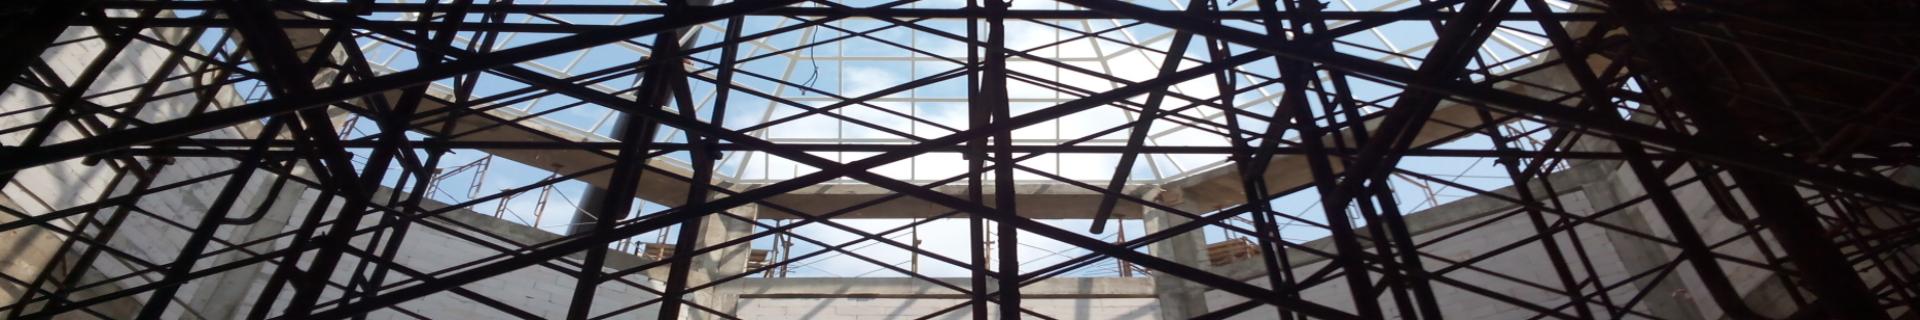 Supported Scaffolding Safety in Industrial and Construction Environments